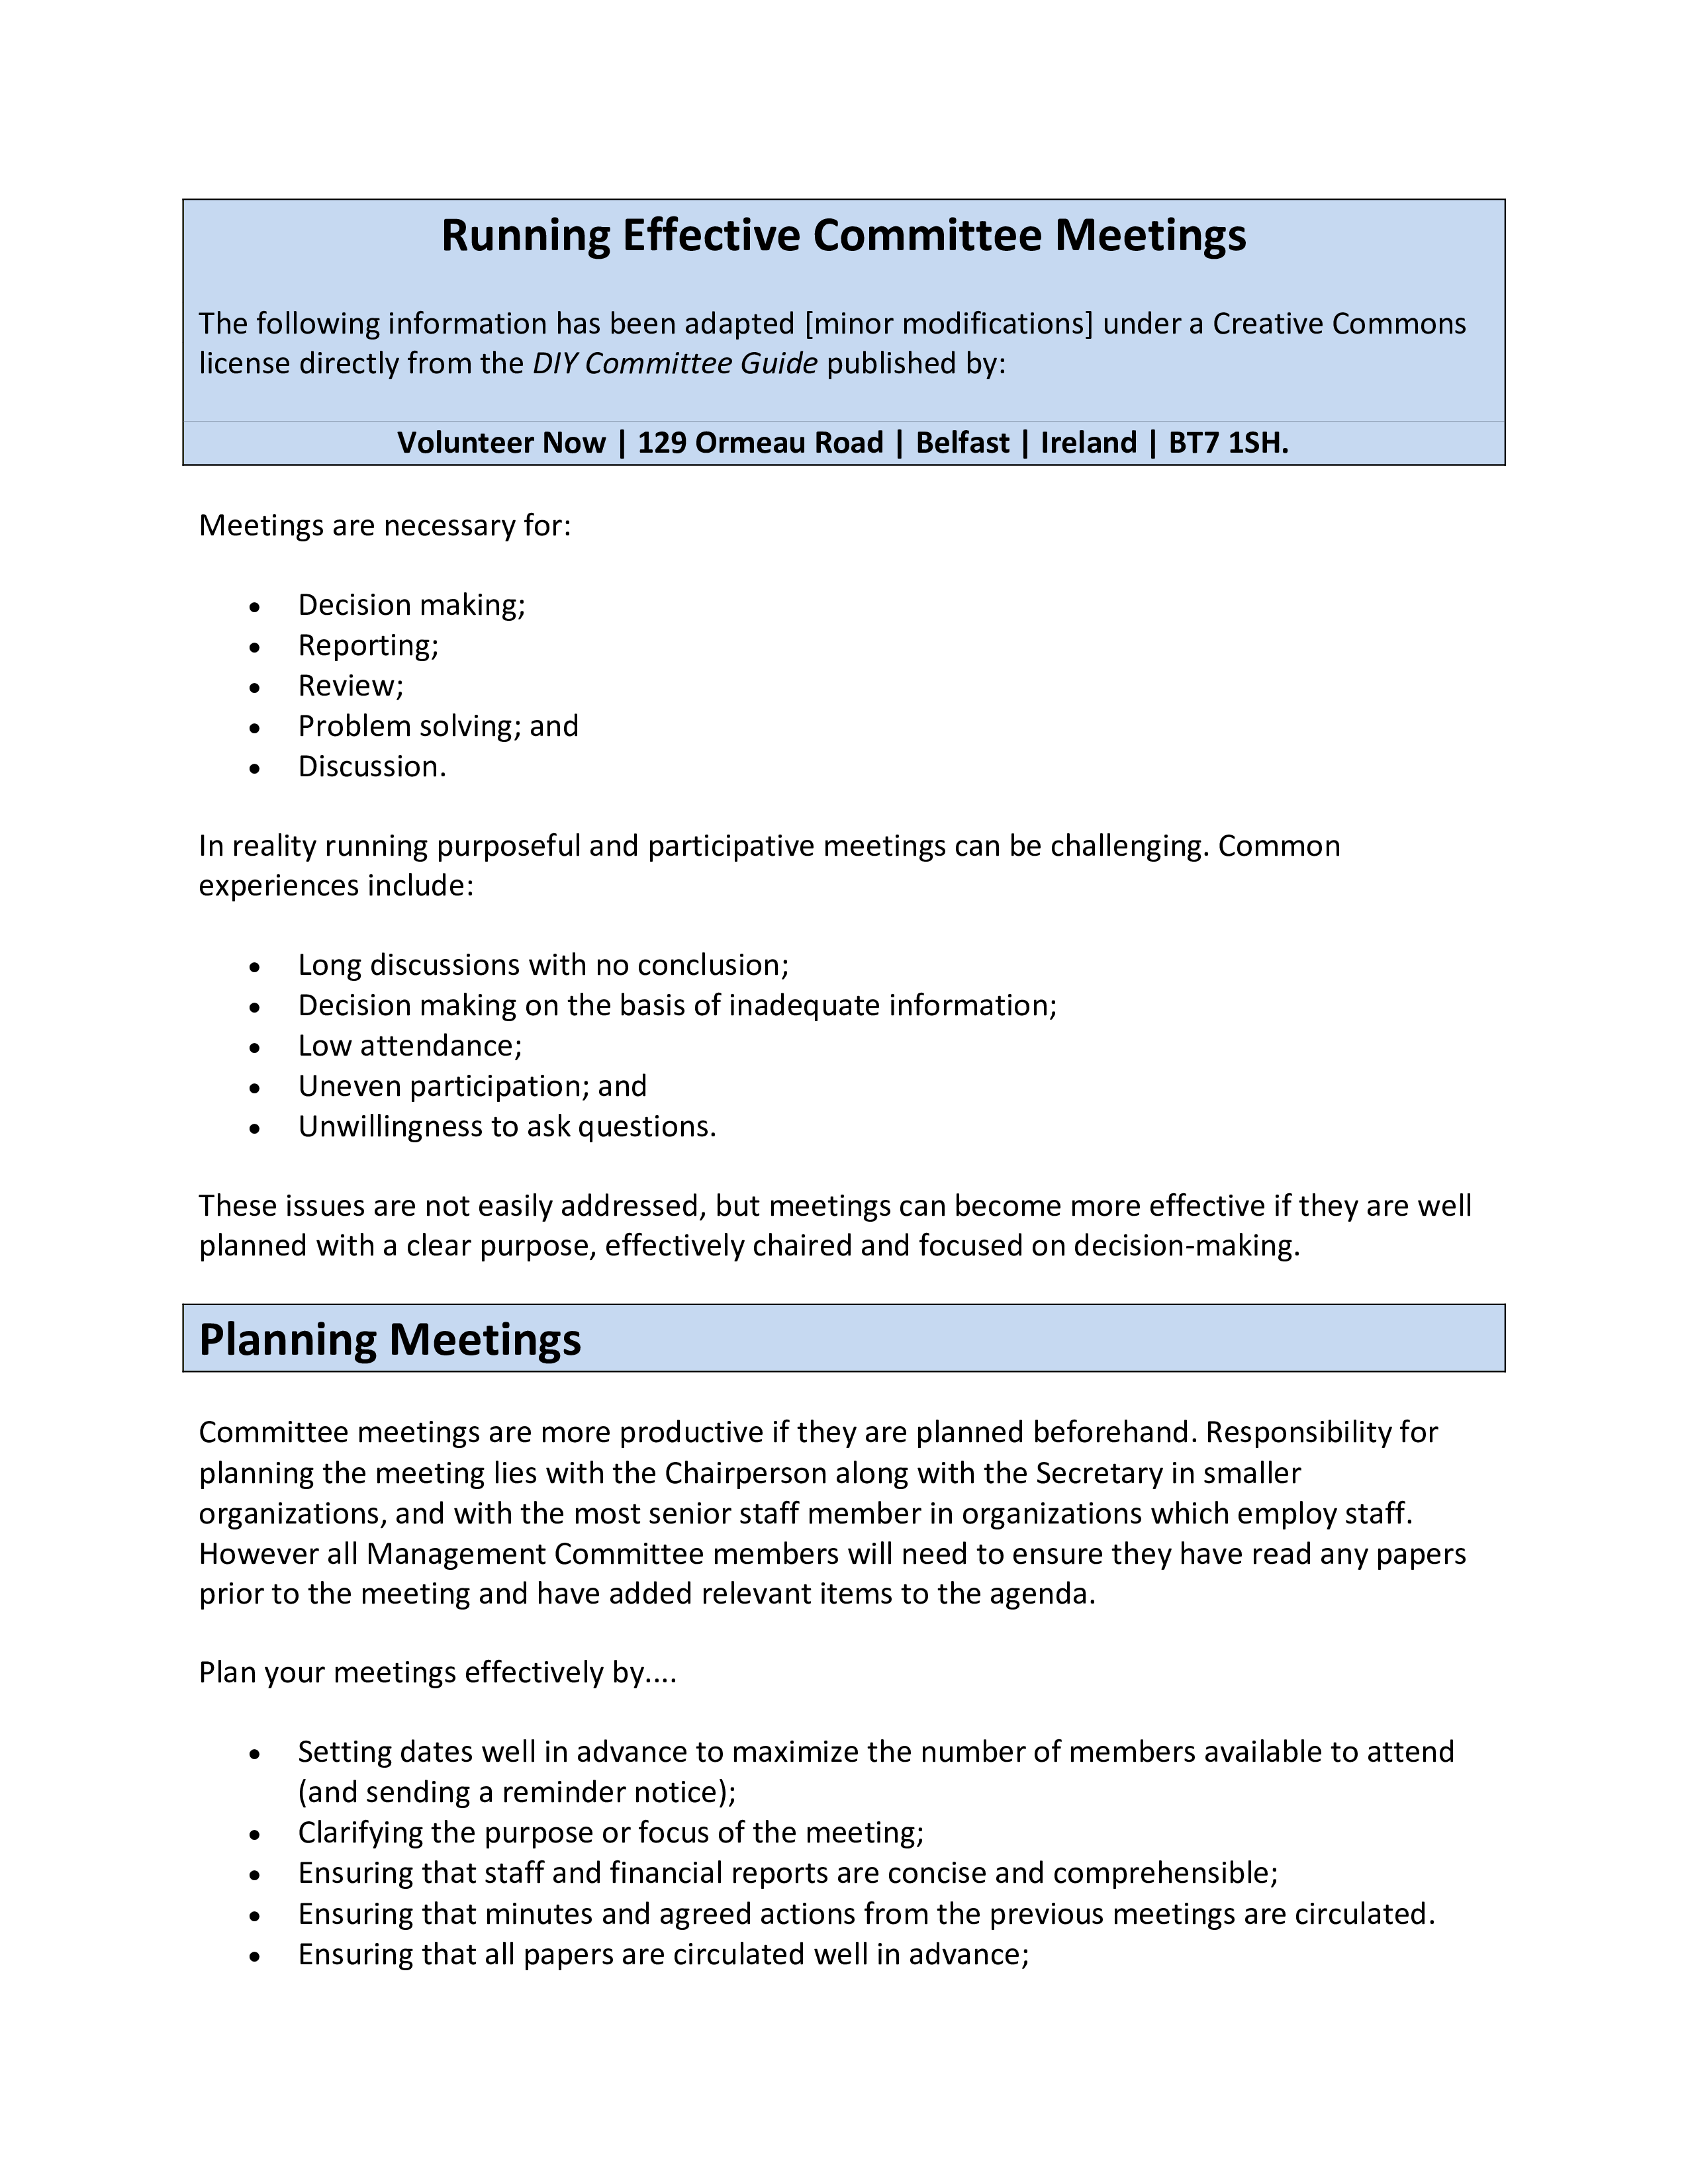 Committee Meeting Minutes Template